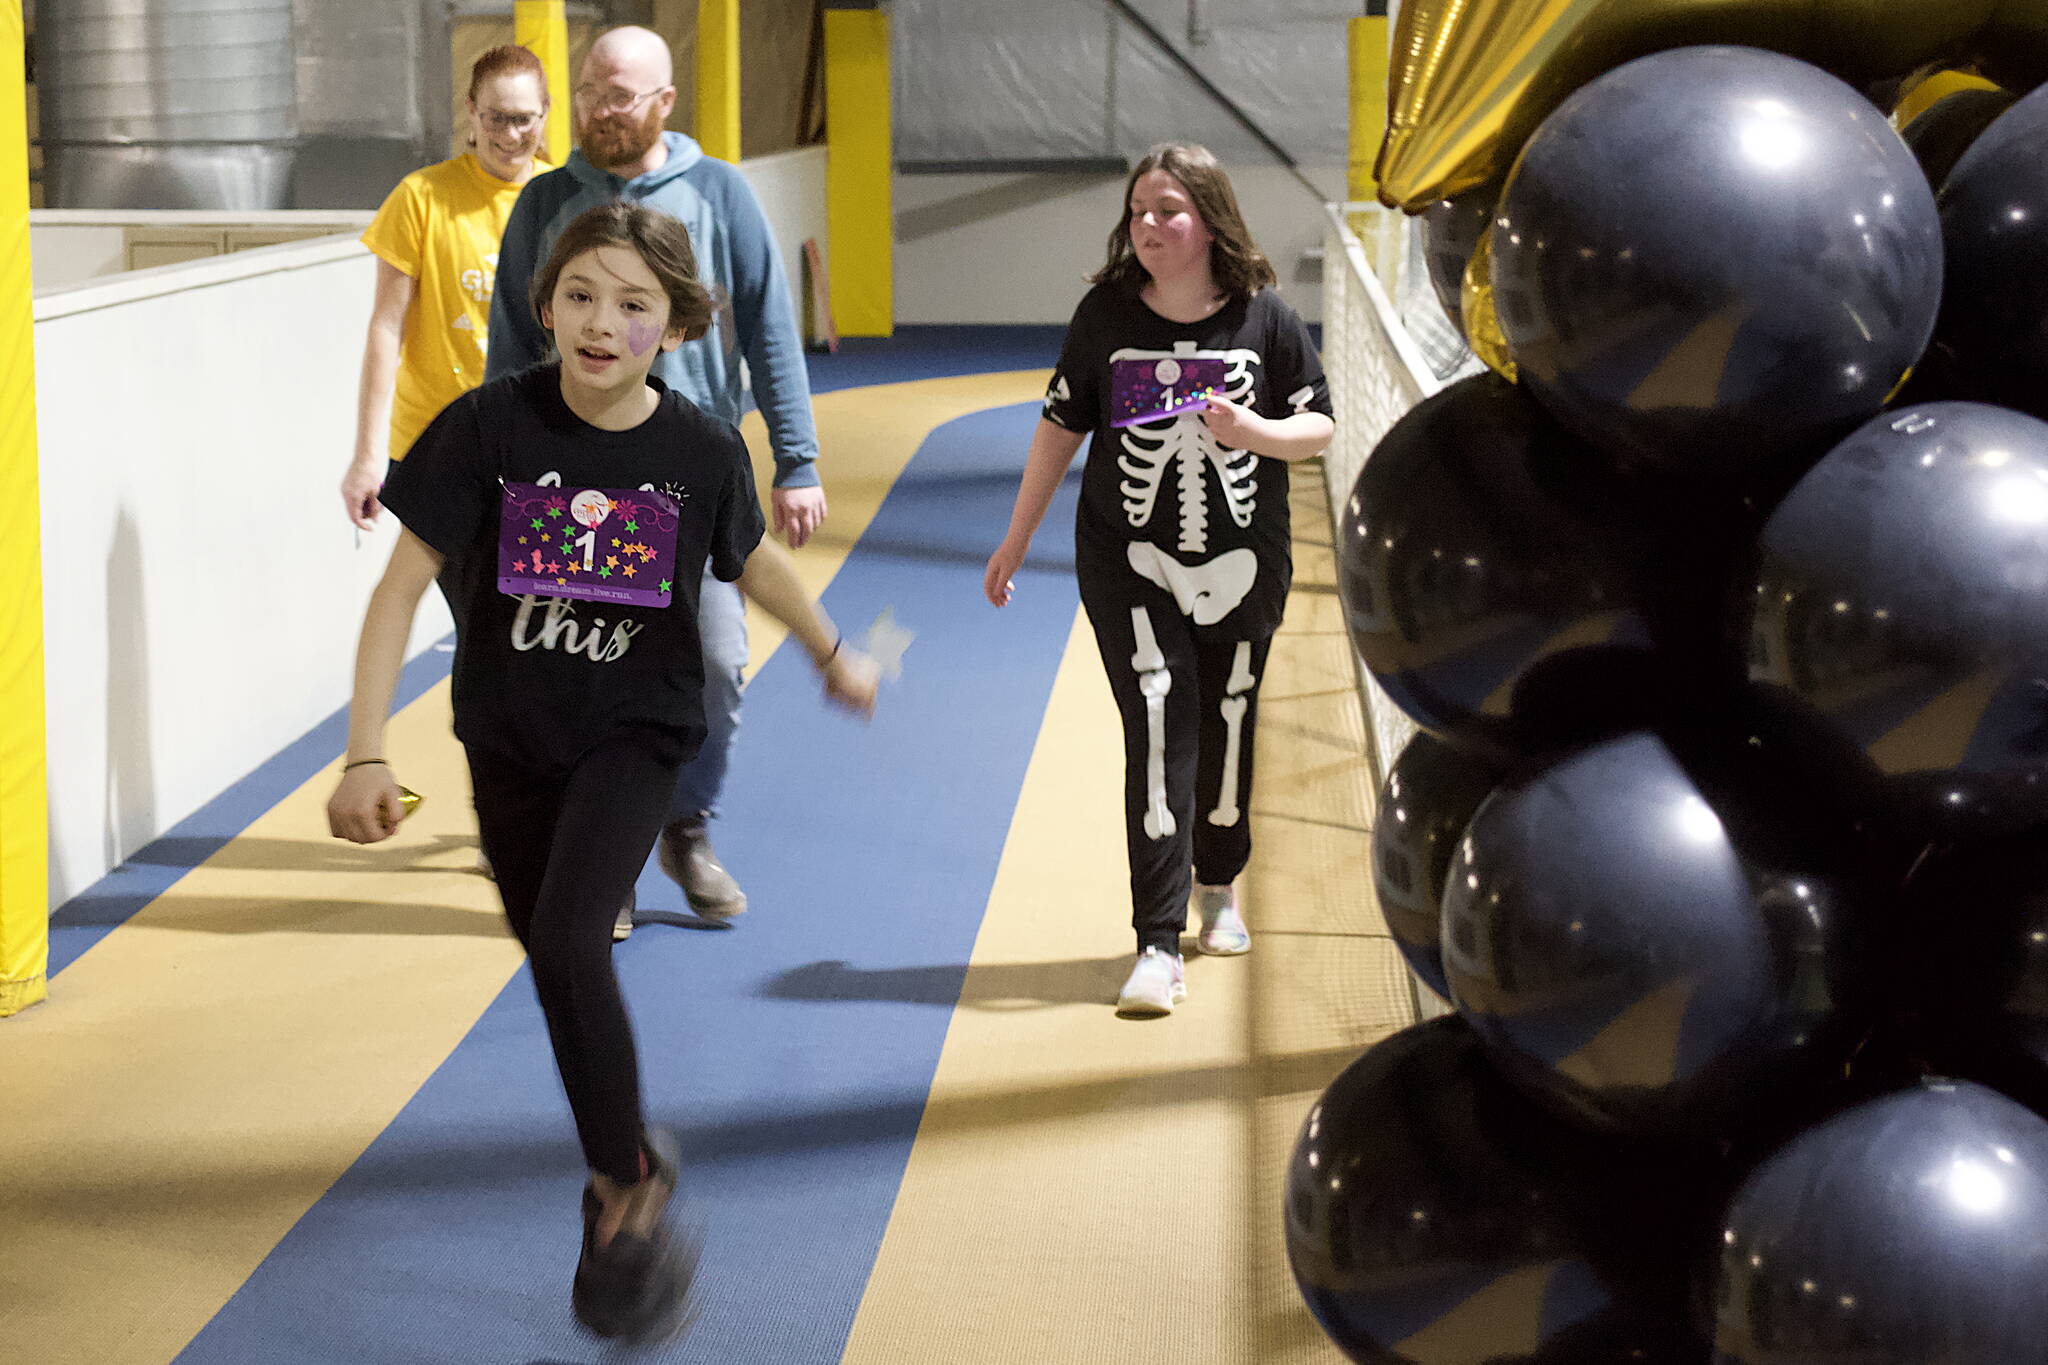 Casey Blackwell, 10, crosses the finish line after running 27 laps around the indoor track at Dimond Park Field House to complete the 5K Pajama Jog on Sunday. (Mark Sabbatini / Juneau Empire)